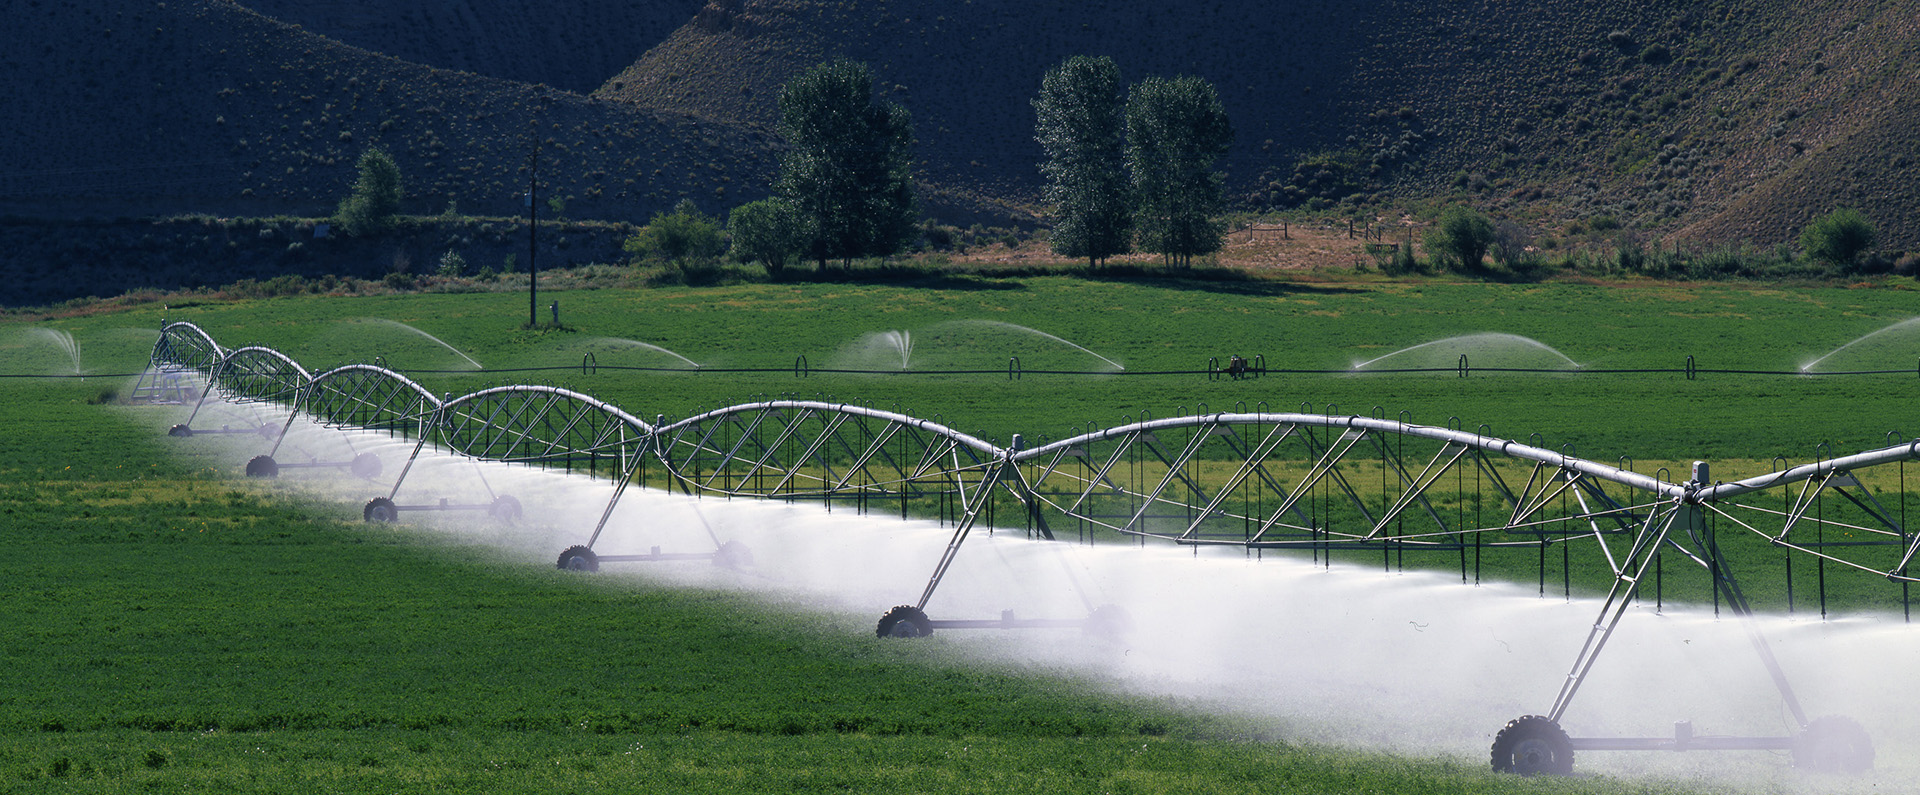 A field being irrigated